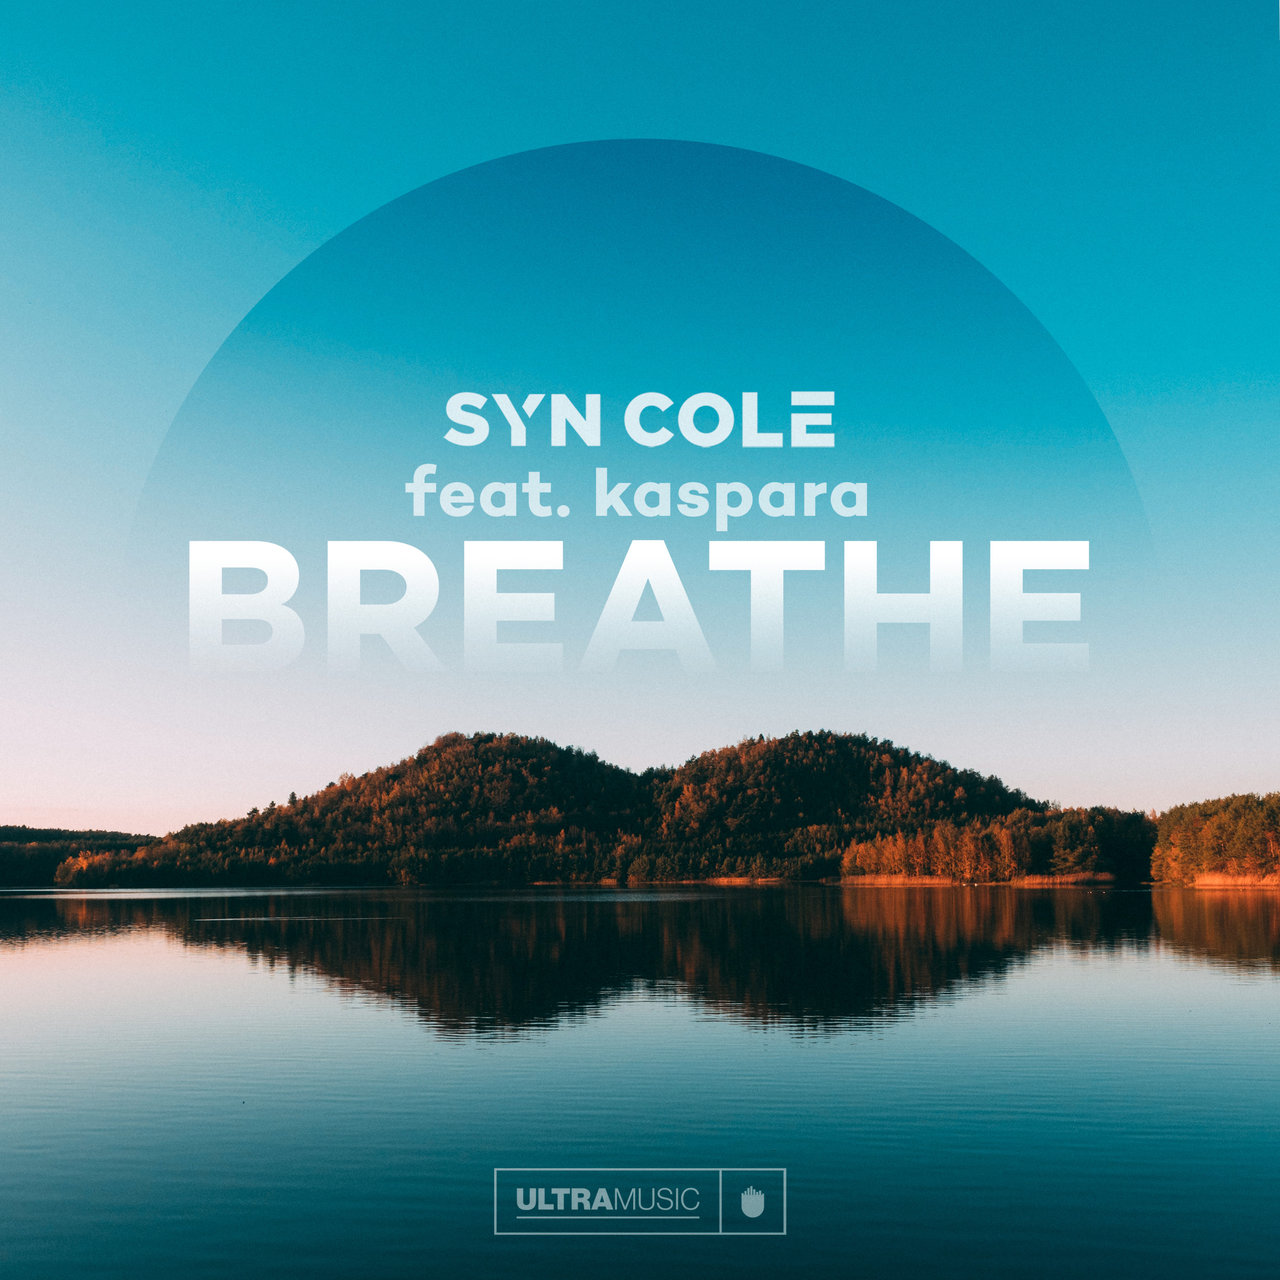 Syn Cole ft. featuring kaspara Breathe cover artwork